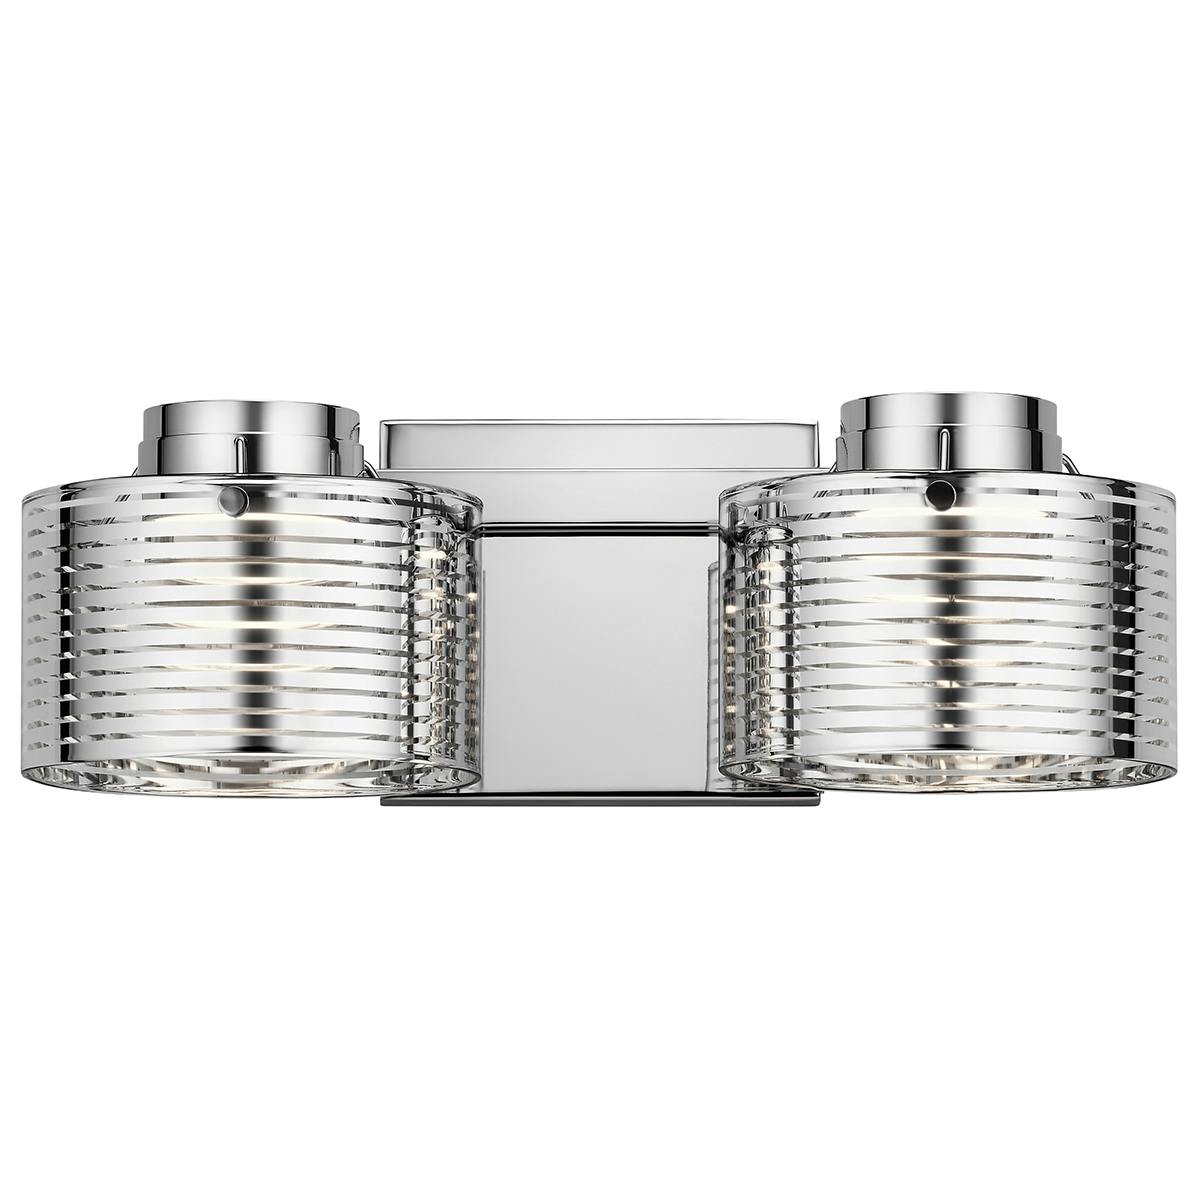 Front view of the Santora 3000K 2 Light Vanity Light Chrome on a white background